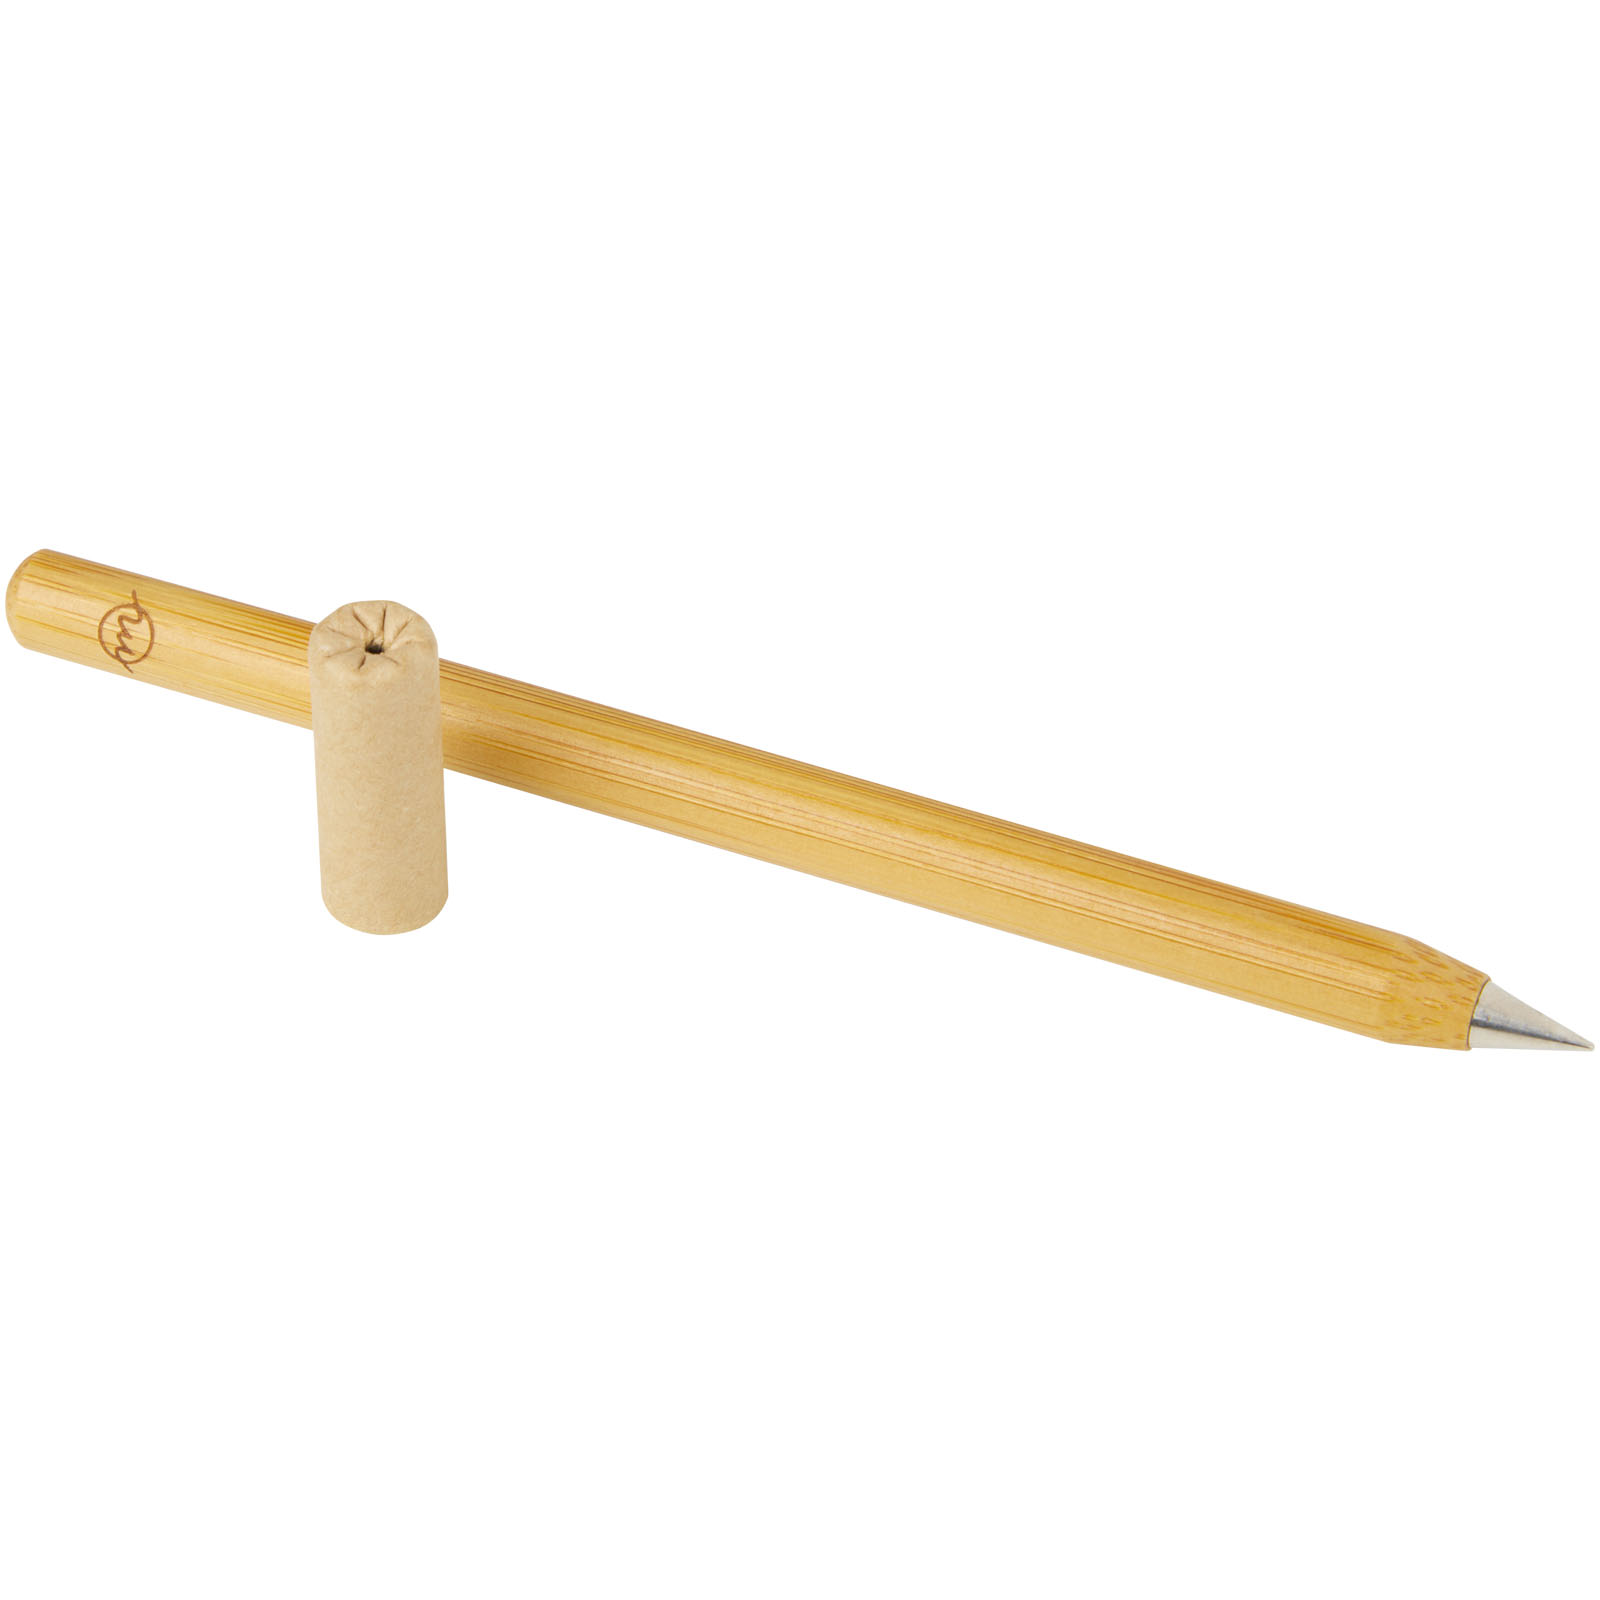 Advertising Other Pens & Writing Accessories - Perie bamboo inkless pen - 3